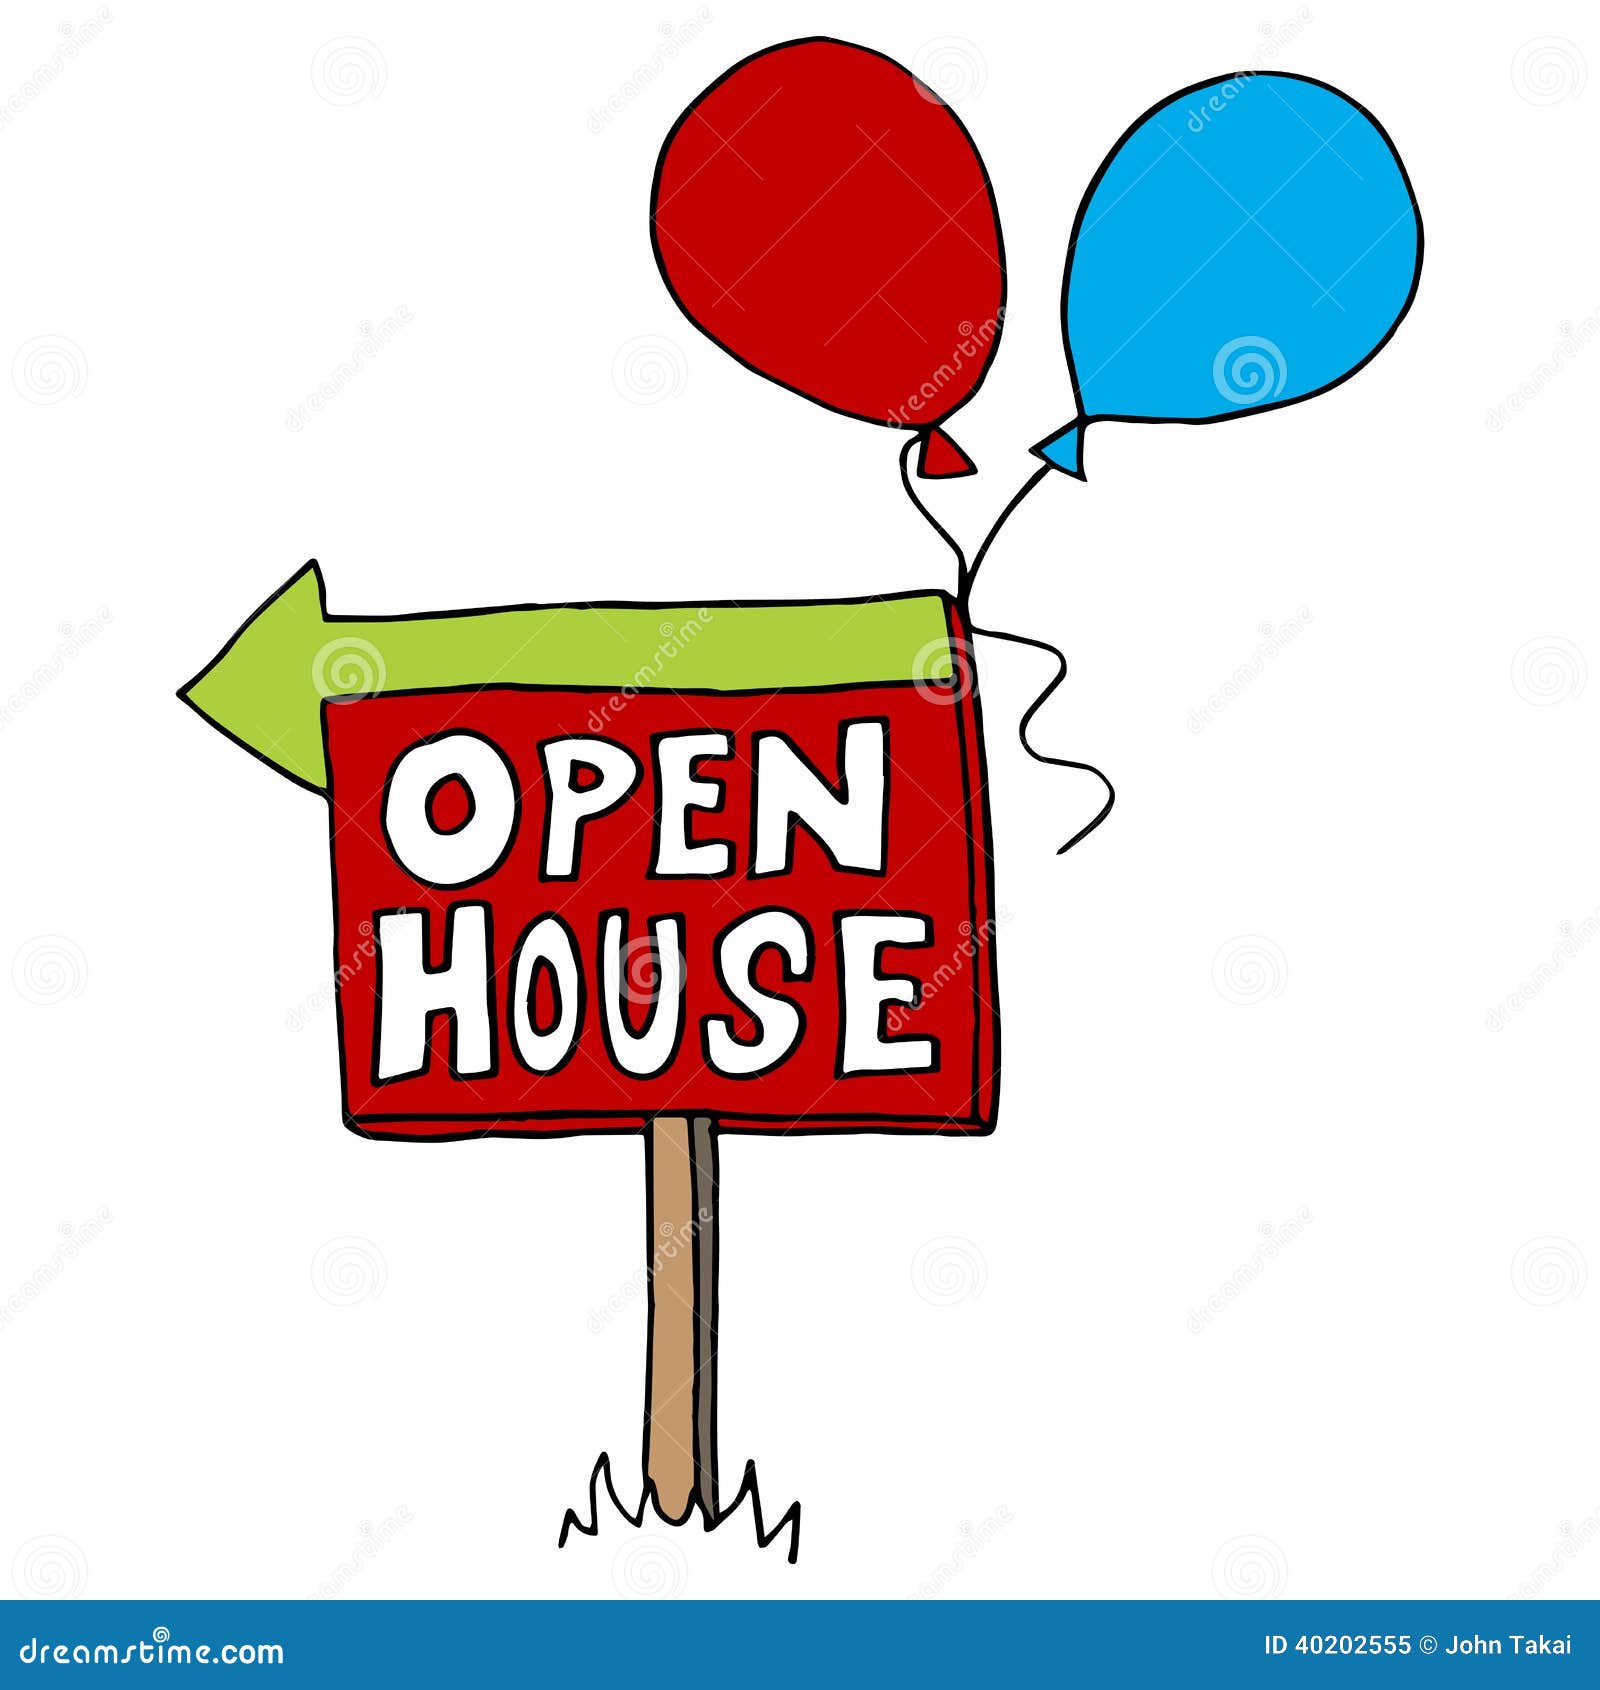 free clipart open house images - photo #46